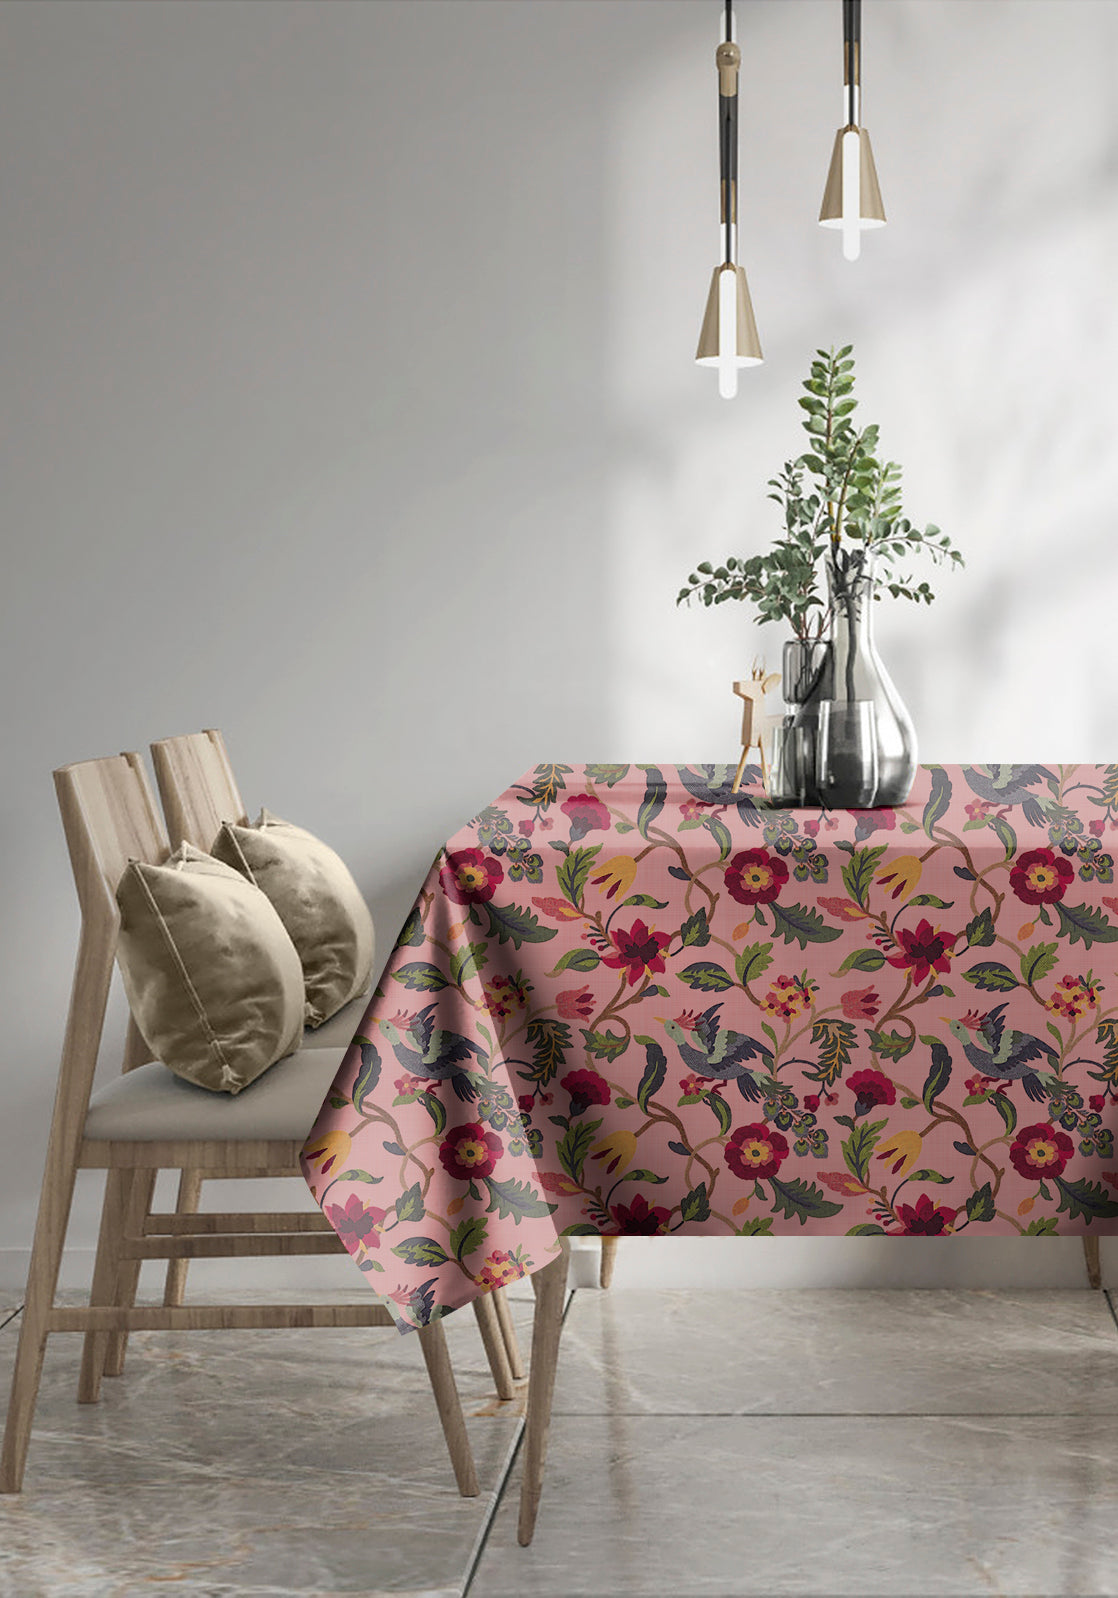 Cabal Rose 6 Seater Table Cloth